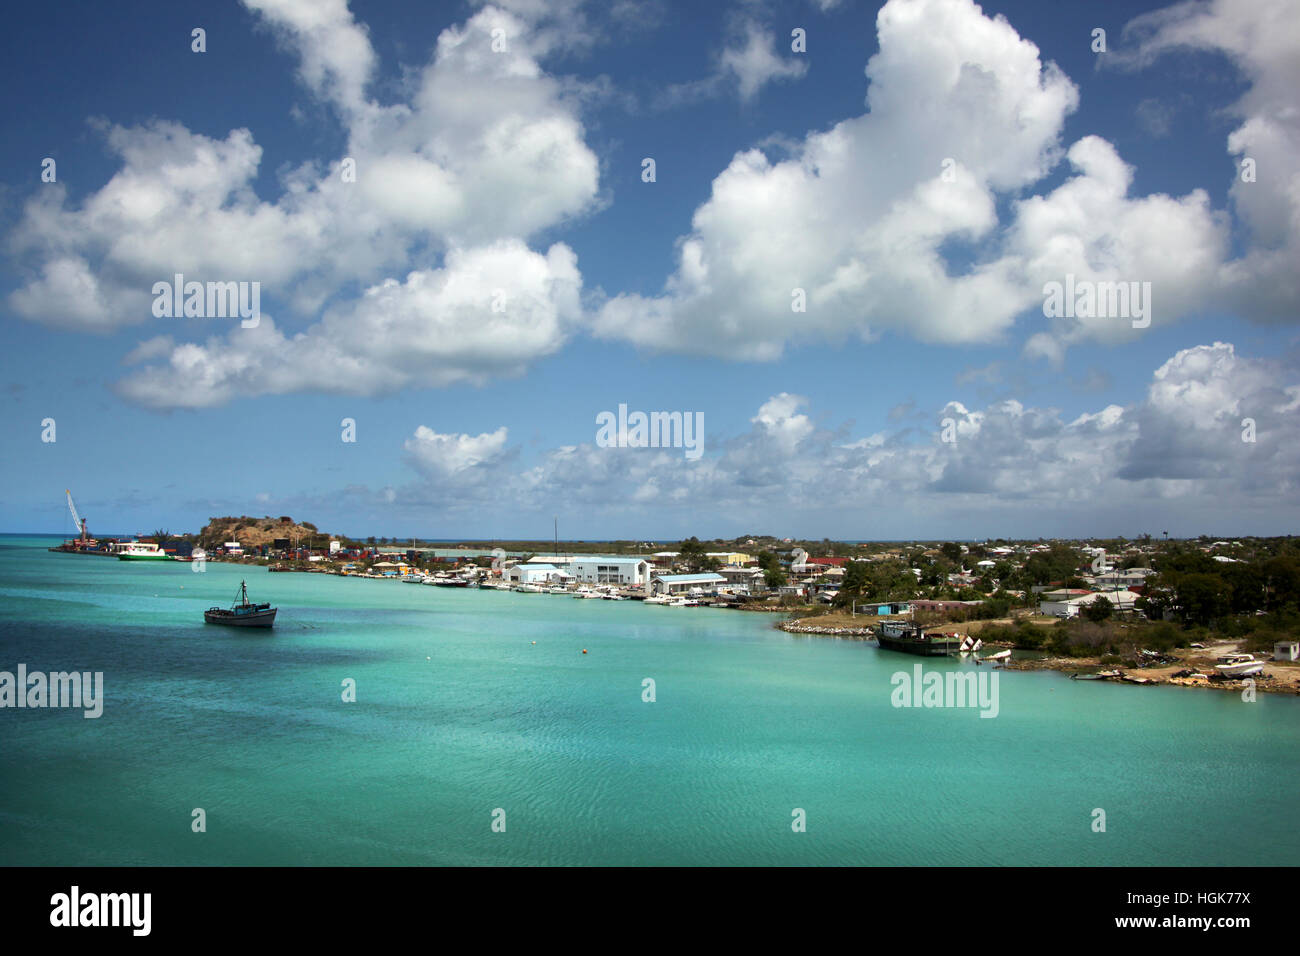 Blue sky & turquoise water. Cruising out of the port of St John's, Antigua on a beautiful day, Caribbean. Stock Photo